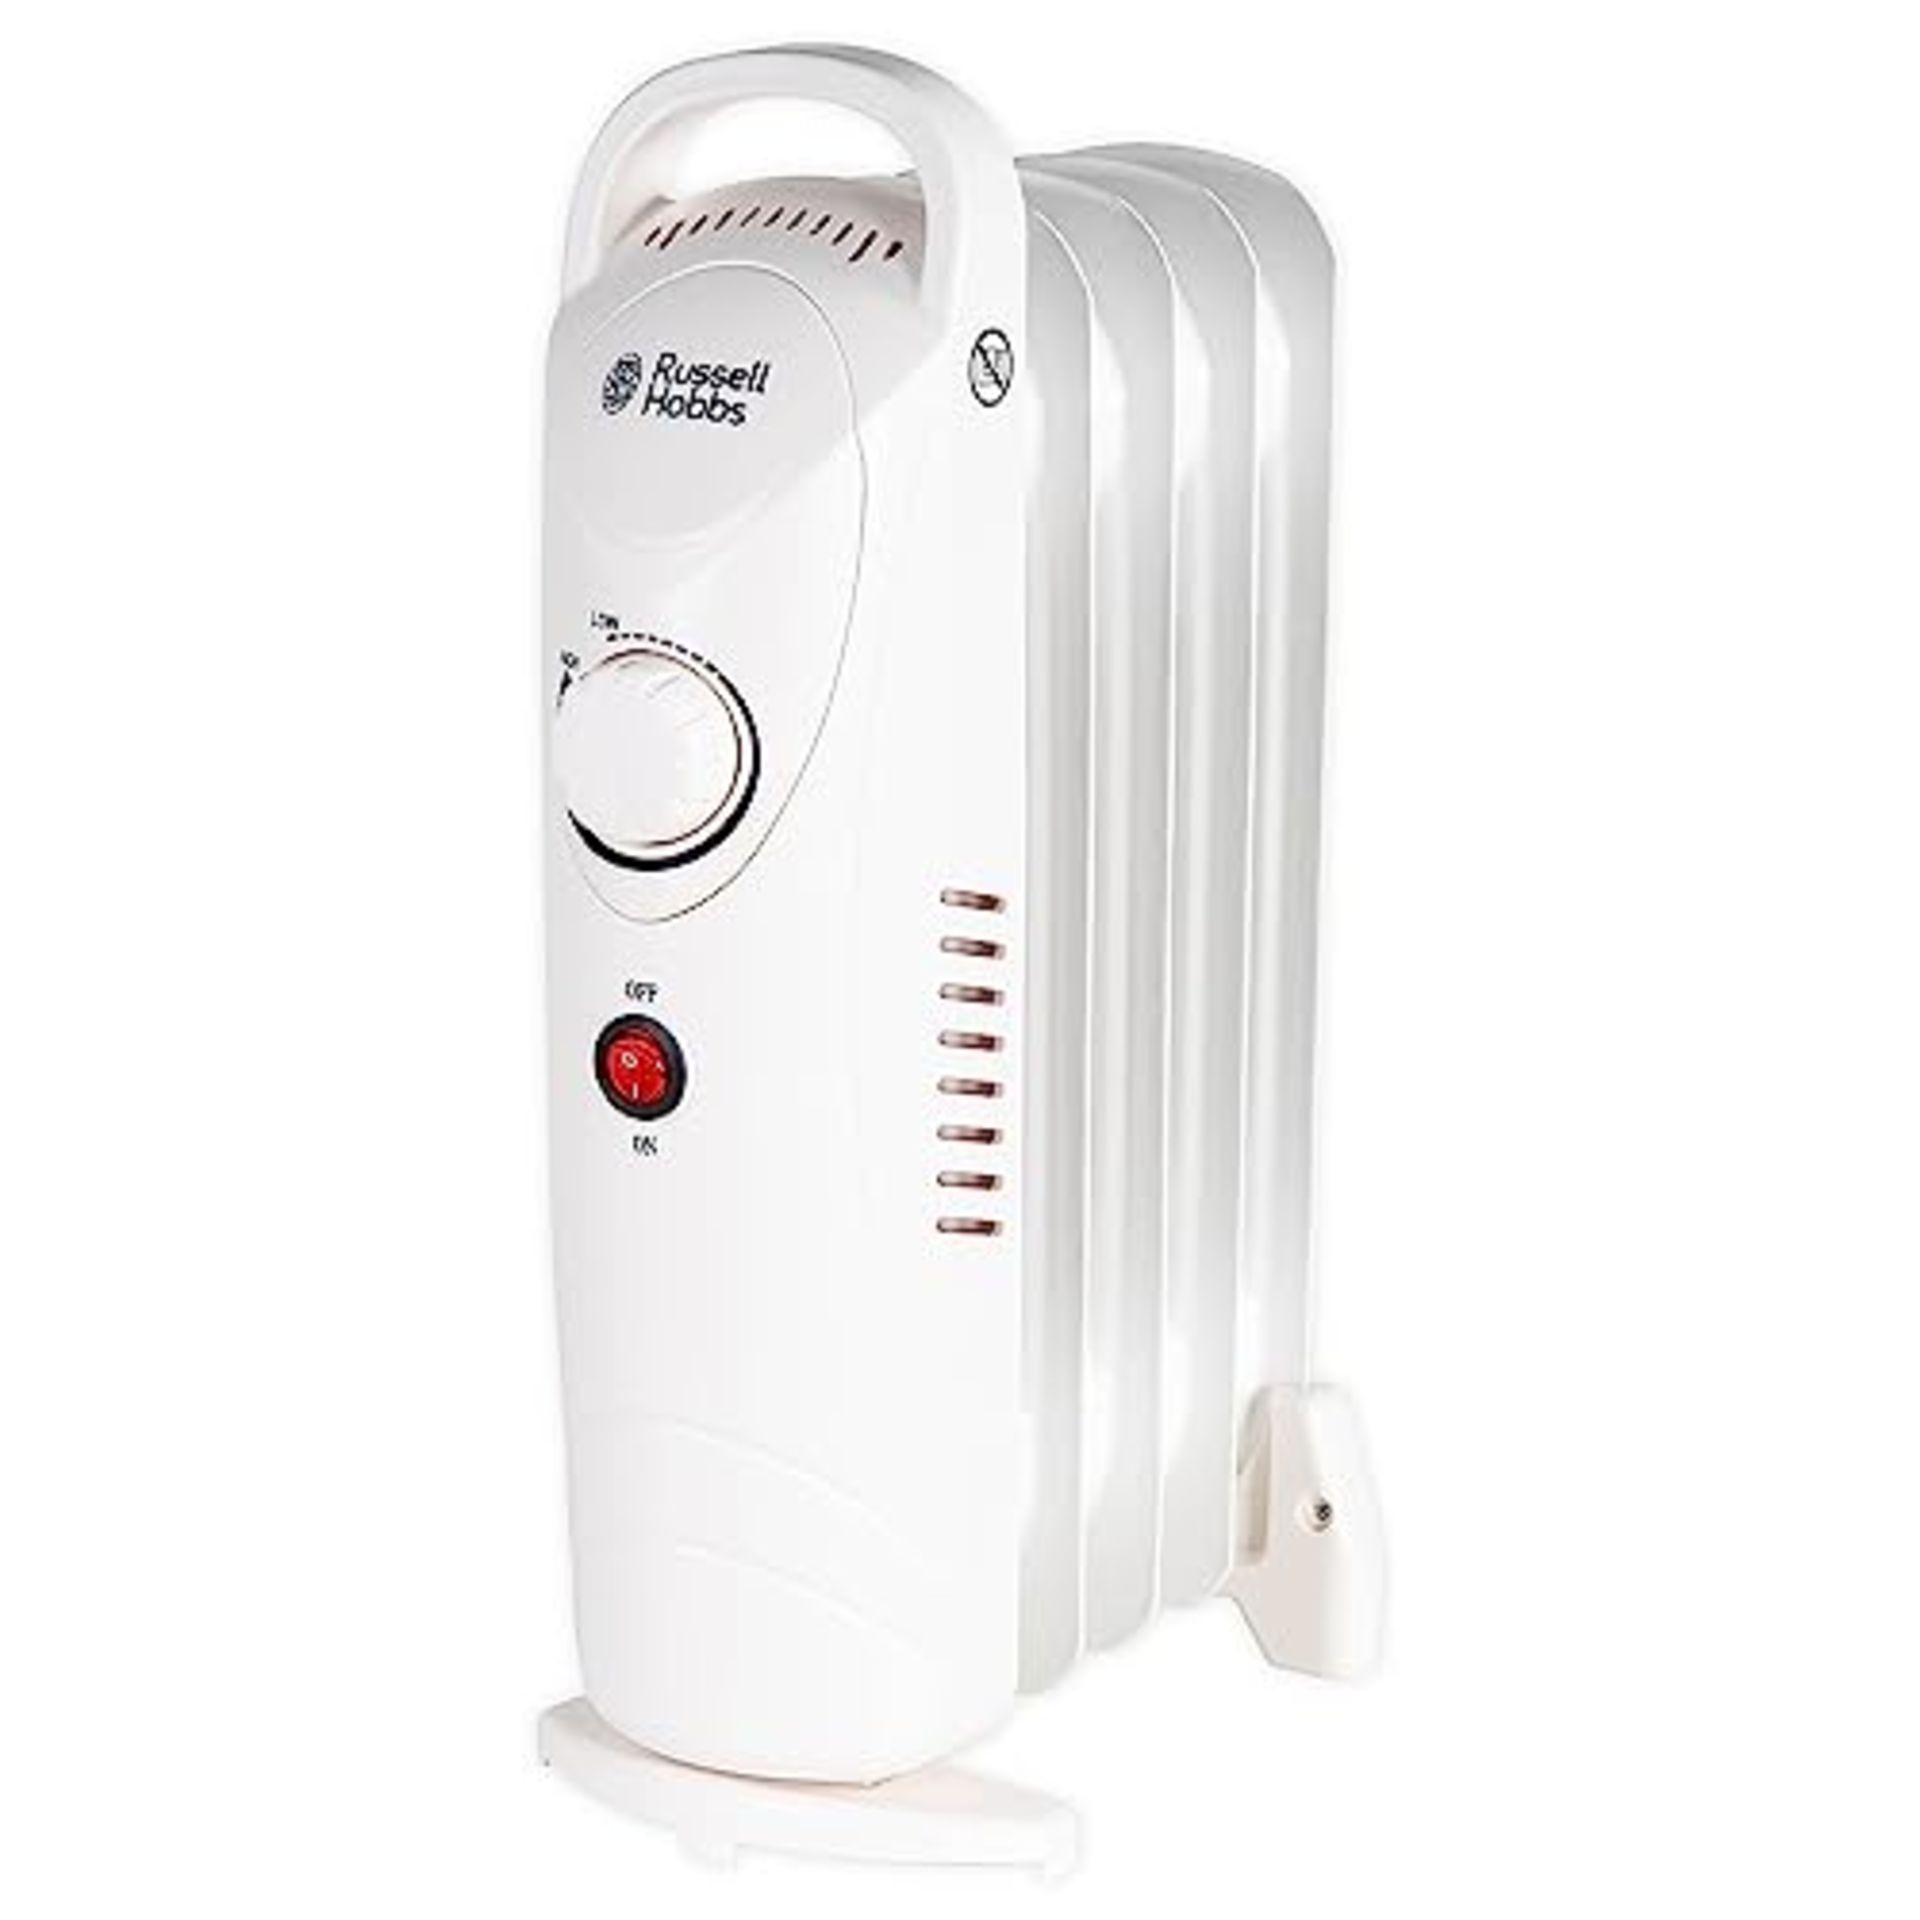 Russell Hobbs 650W Oil Filled Radiator, 5 Fin Portable Electric Heater - White, Adjust